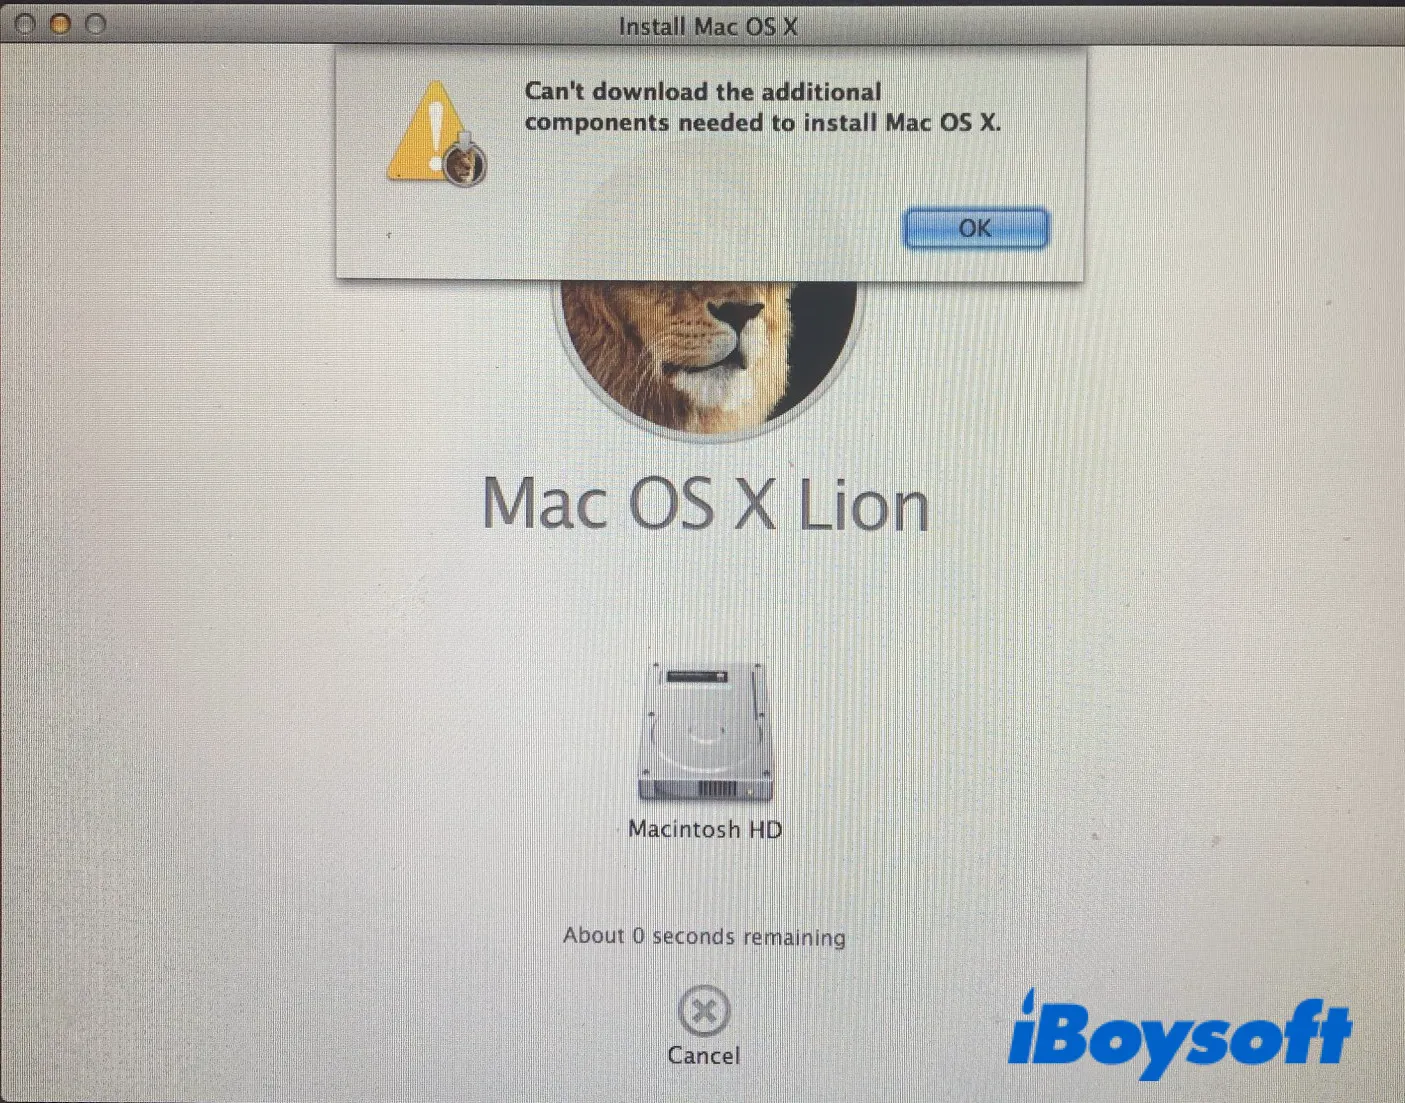 Cant download the additional components needed to install Mac OS X